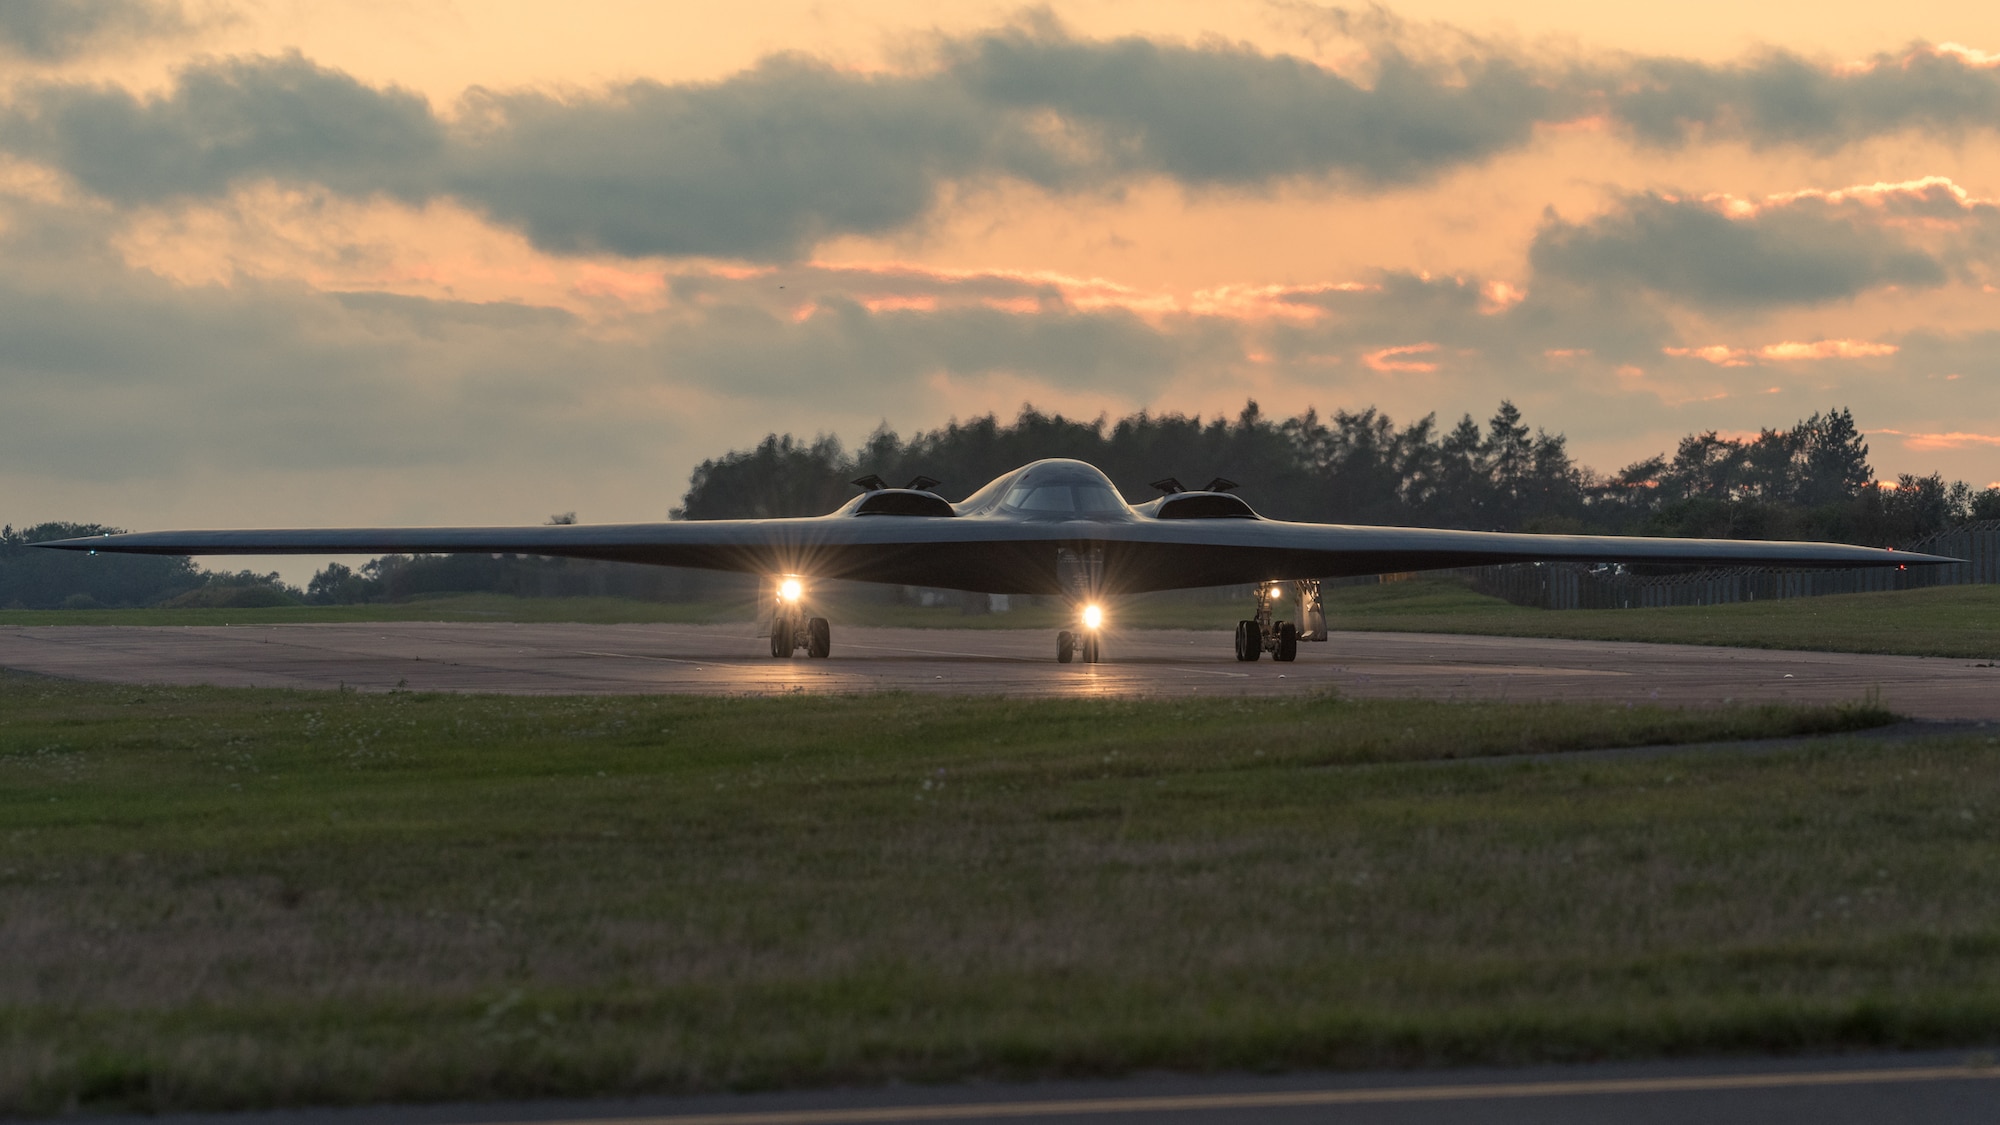 A B-2 Spirit Stealth Bomber, assigned to the 509th Bomb Wing, at Whiteman Air Force Base, Missouri, taxis down a runway at Royal Air Base Fairford, England, on September 11, 2019. Three B-2 bombers, Airmen and support equipment from Whiteman AFB deployed to RAF Fairford as part of Bomber Task Force Europe. Bomber missions like BTF Europe, help familiarize aircrews with air bases, airspace and operations in different geographic combatant commands. These multinational missions strengthen professional relationships and improves overall coordination with allies and partner militaries. (U.S. Air Force photo by Senior Airman Thomas Barley)